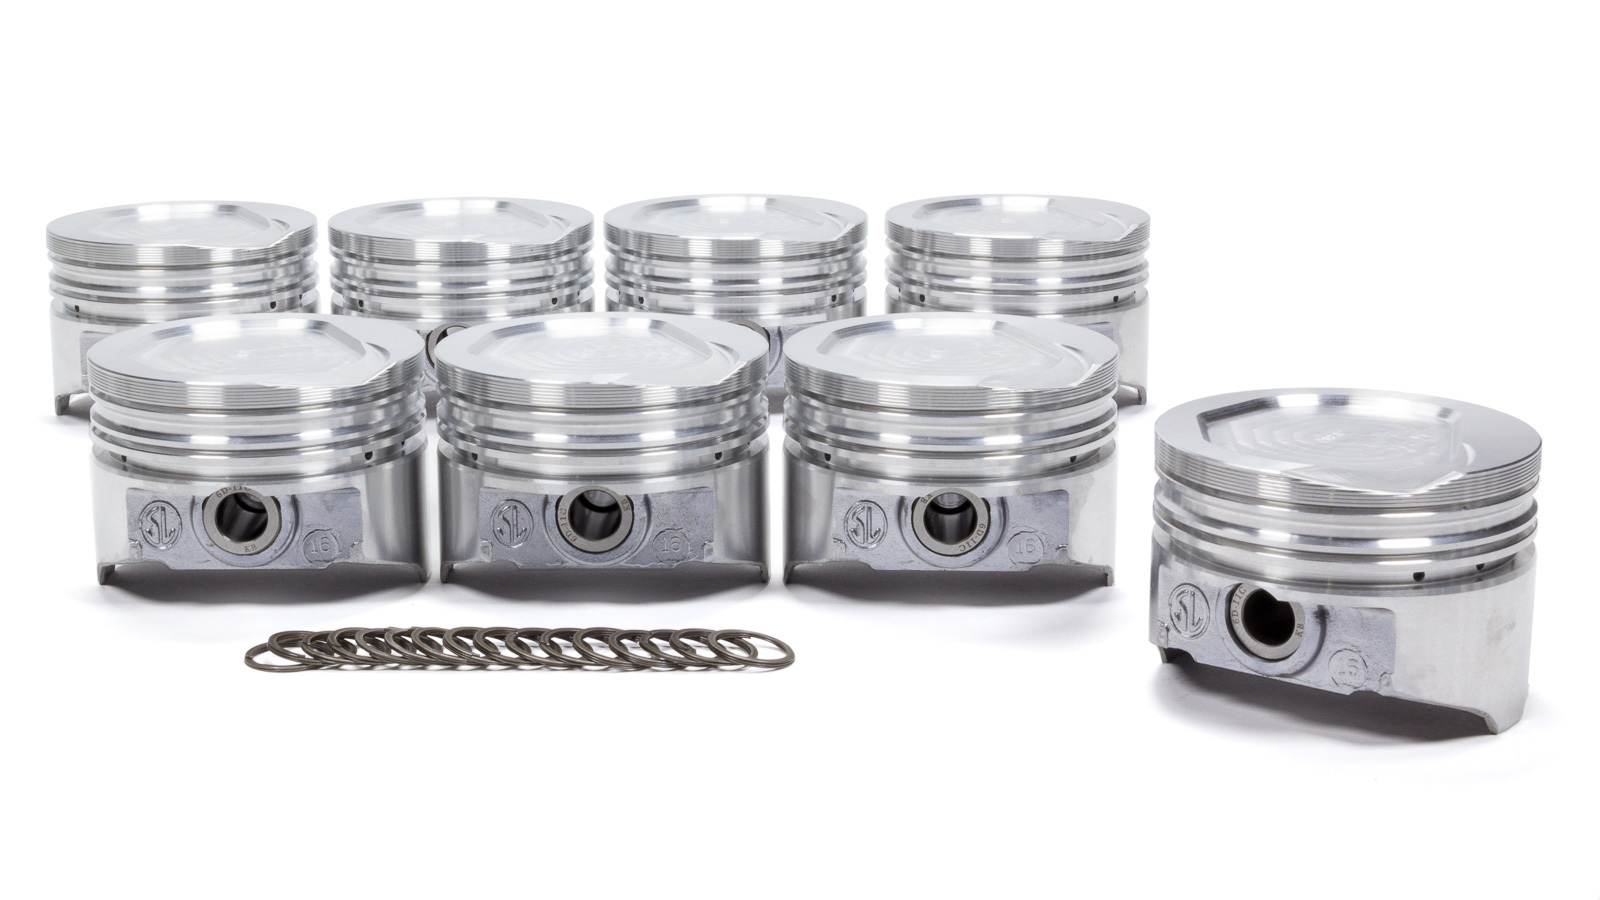 KB Pistons KB148.030 Piston, Hypereutectic, 4.030 in Bore, 5/64 x 5/64 x 3/16 in Ring Grooves, Minus 13.00 cc, Ford Cleveland / Modified, Set of 8